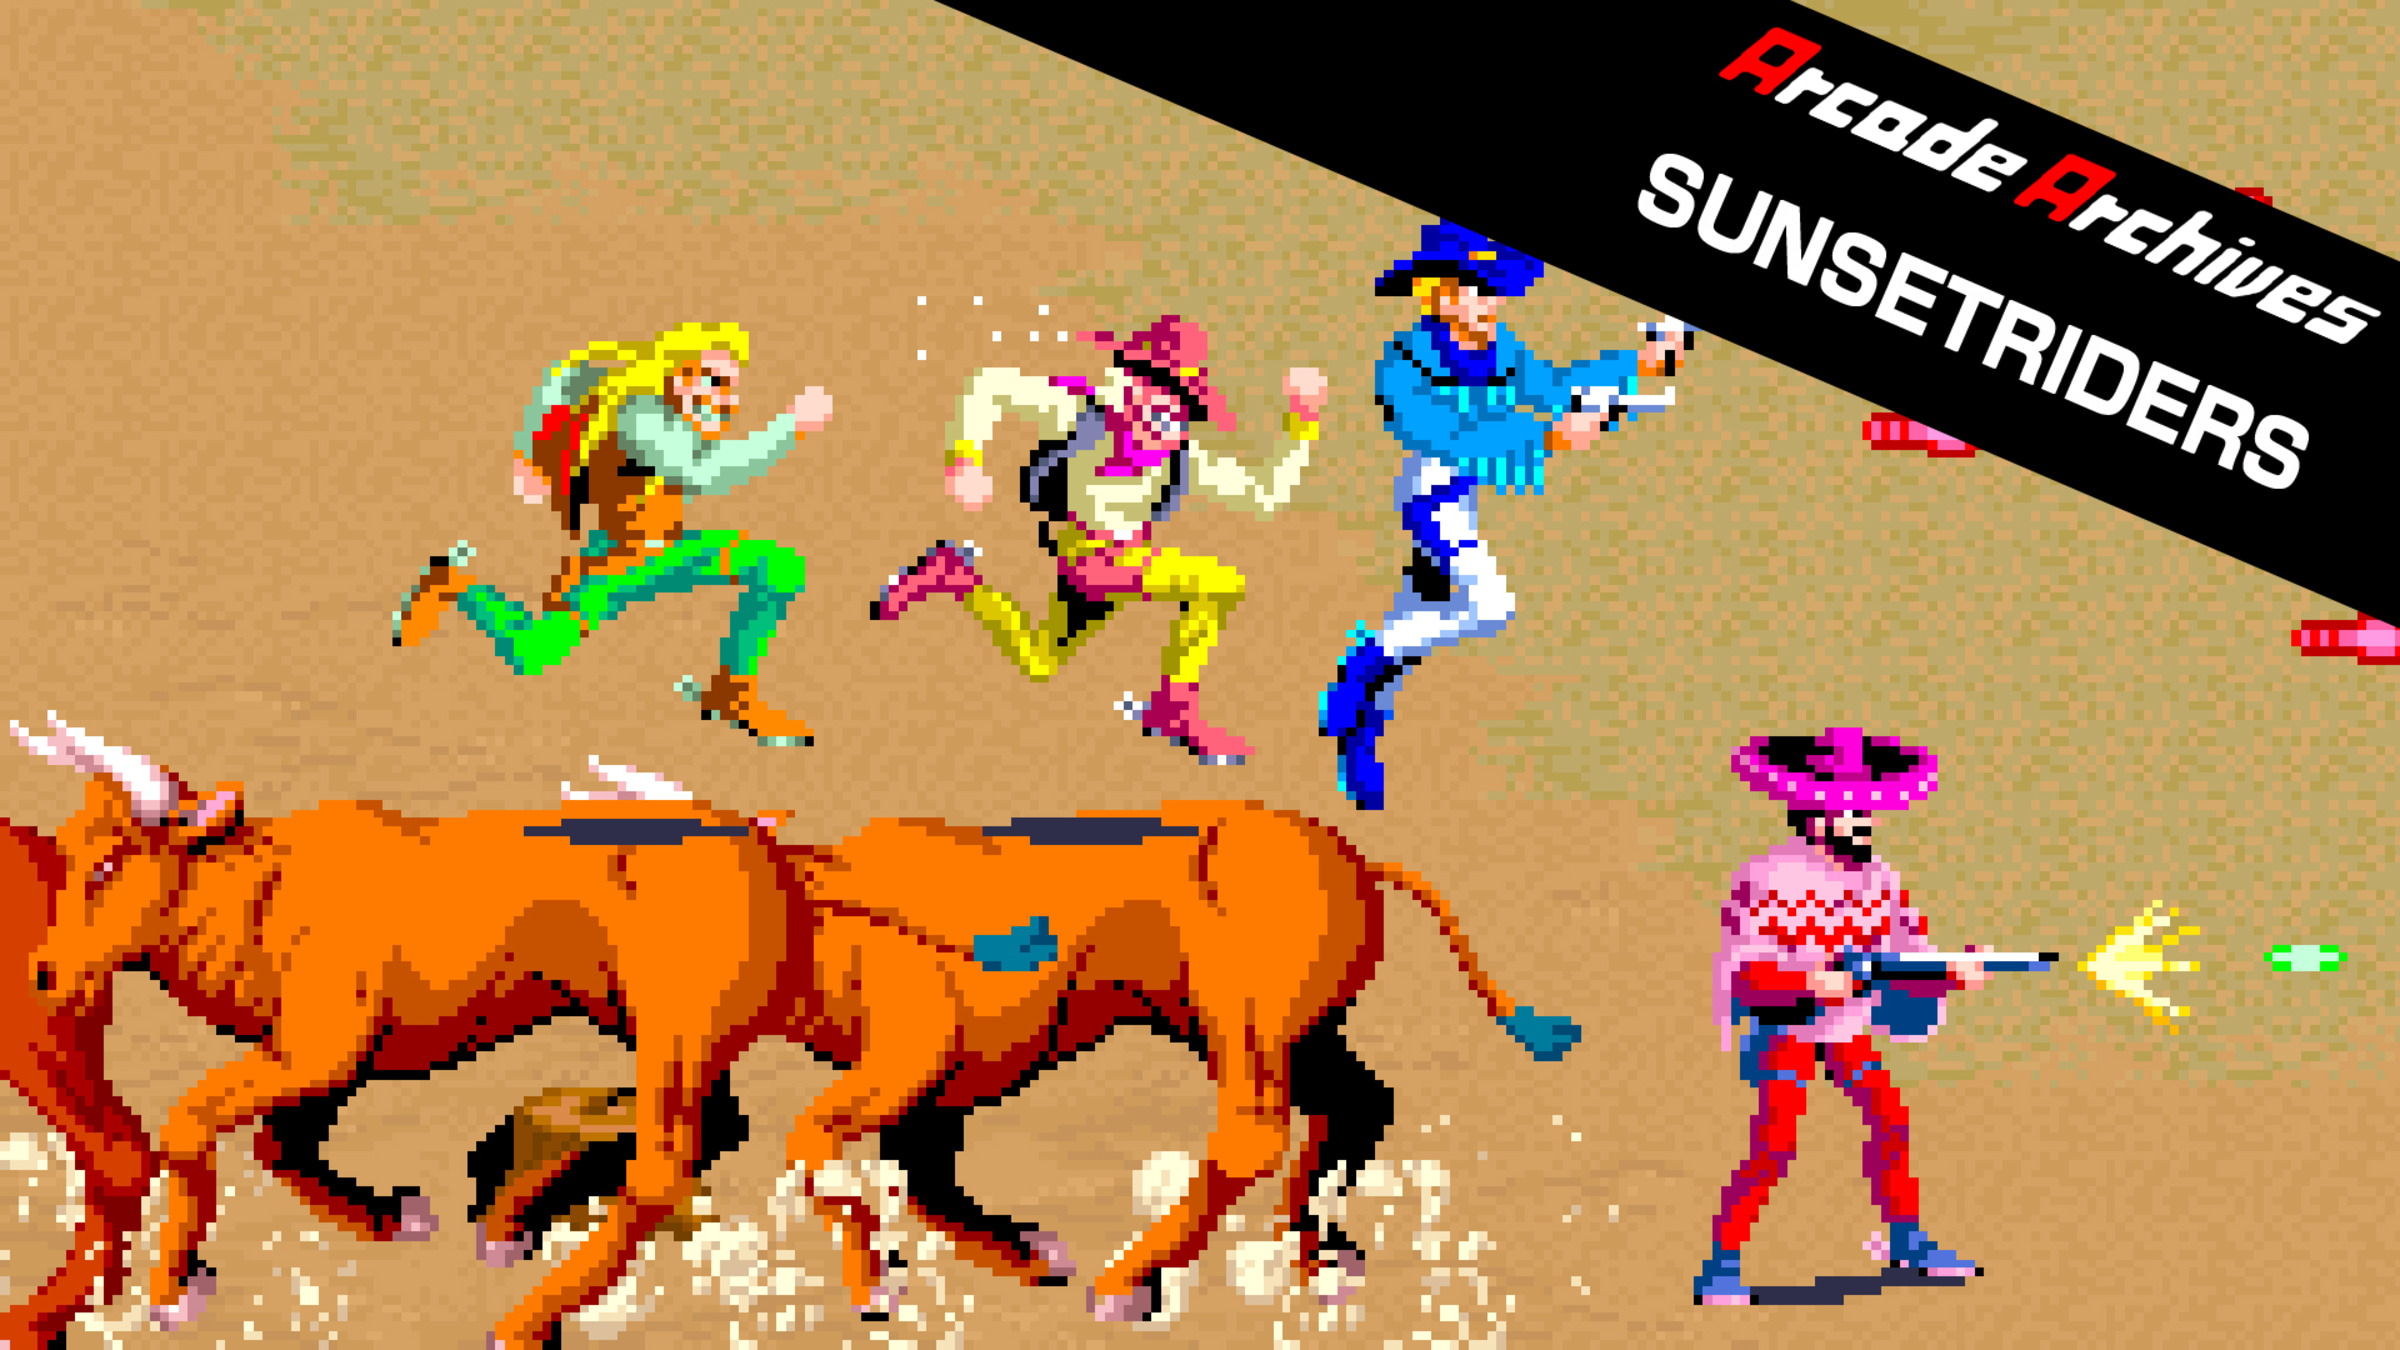 Arcade Archives SUNSETRIDERS for Nintendo Switch